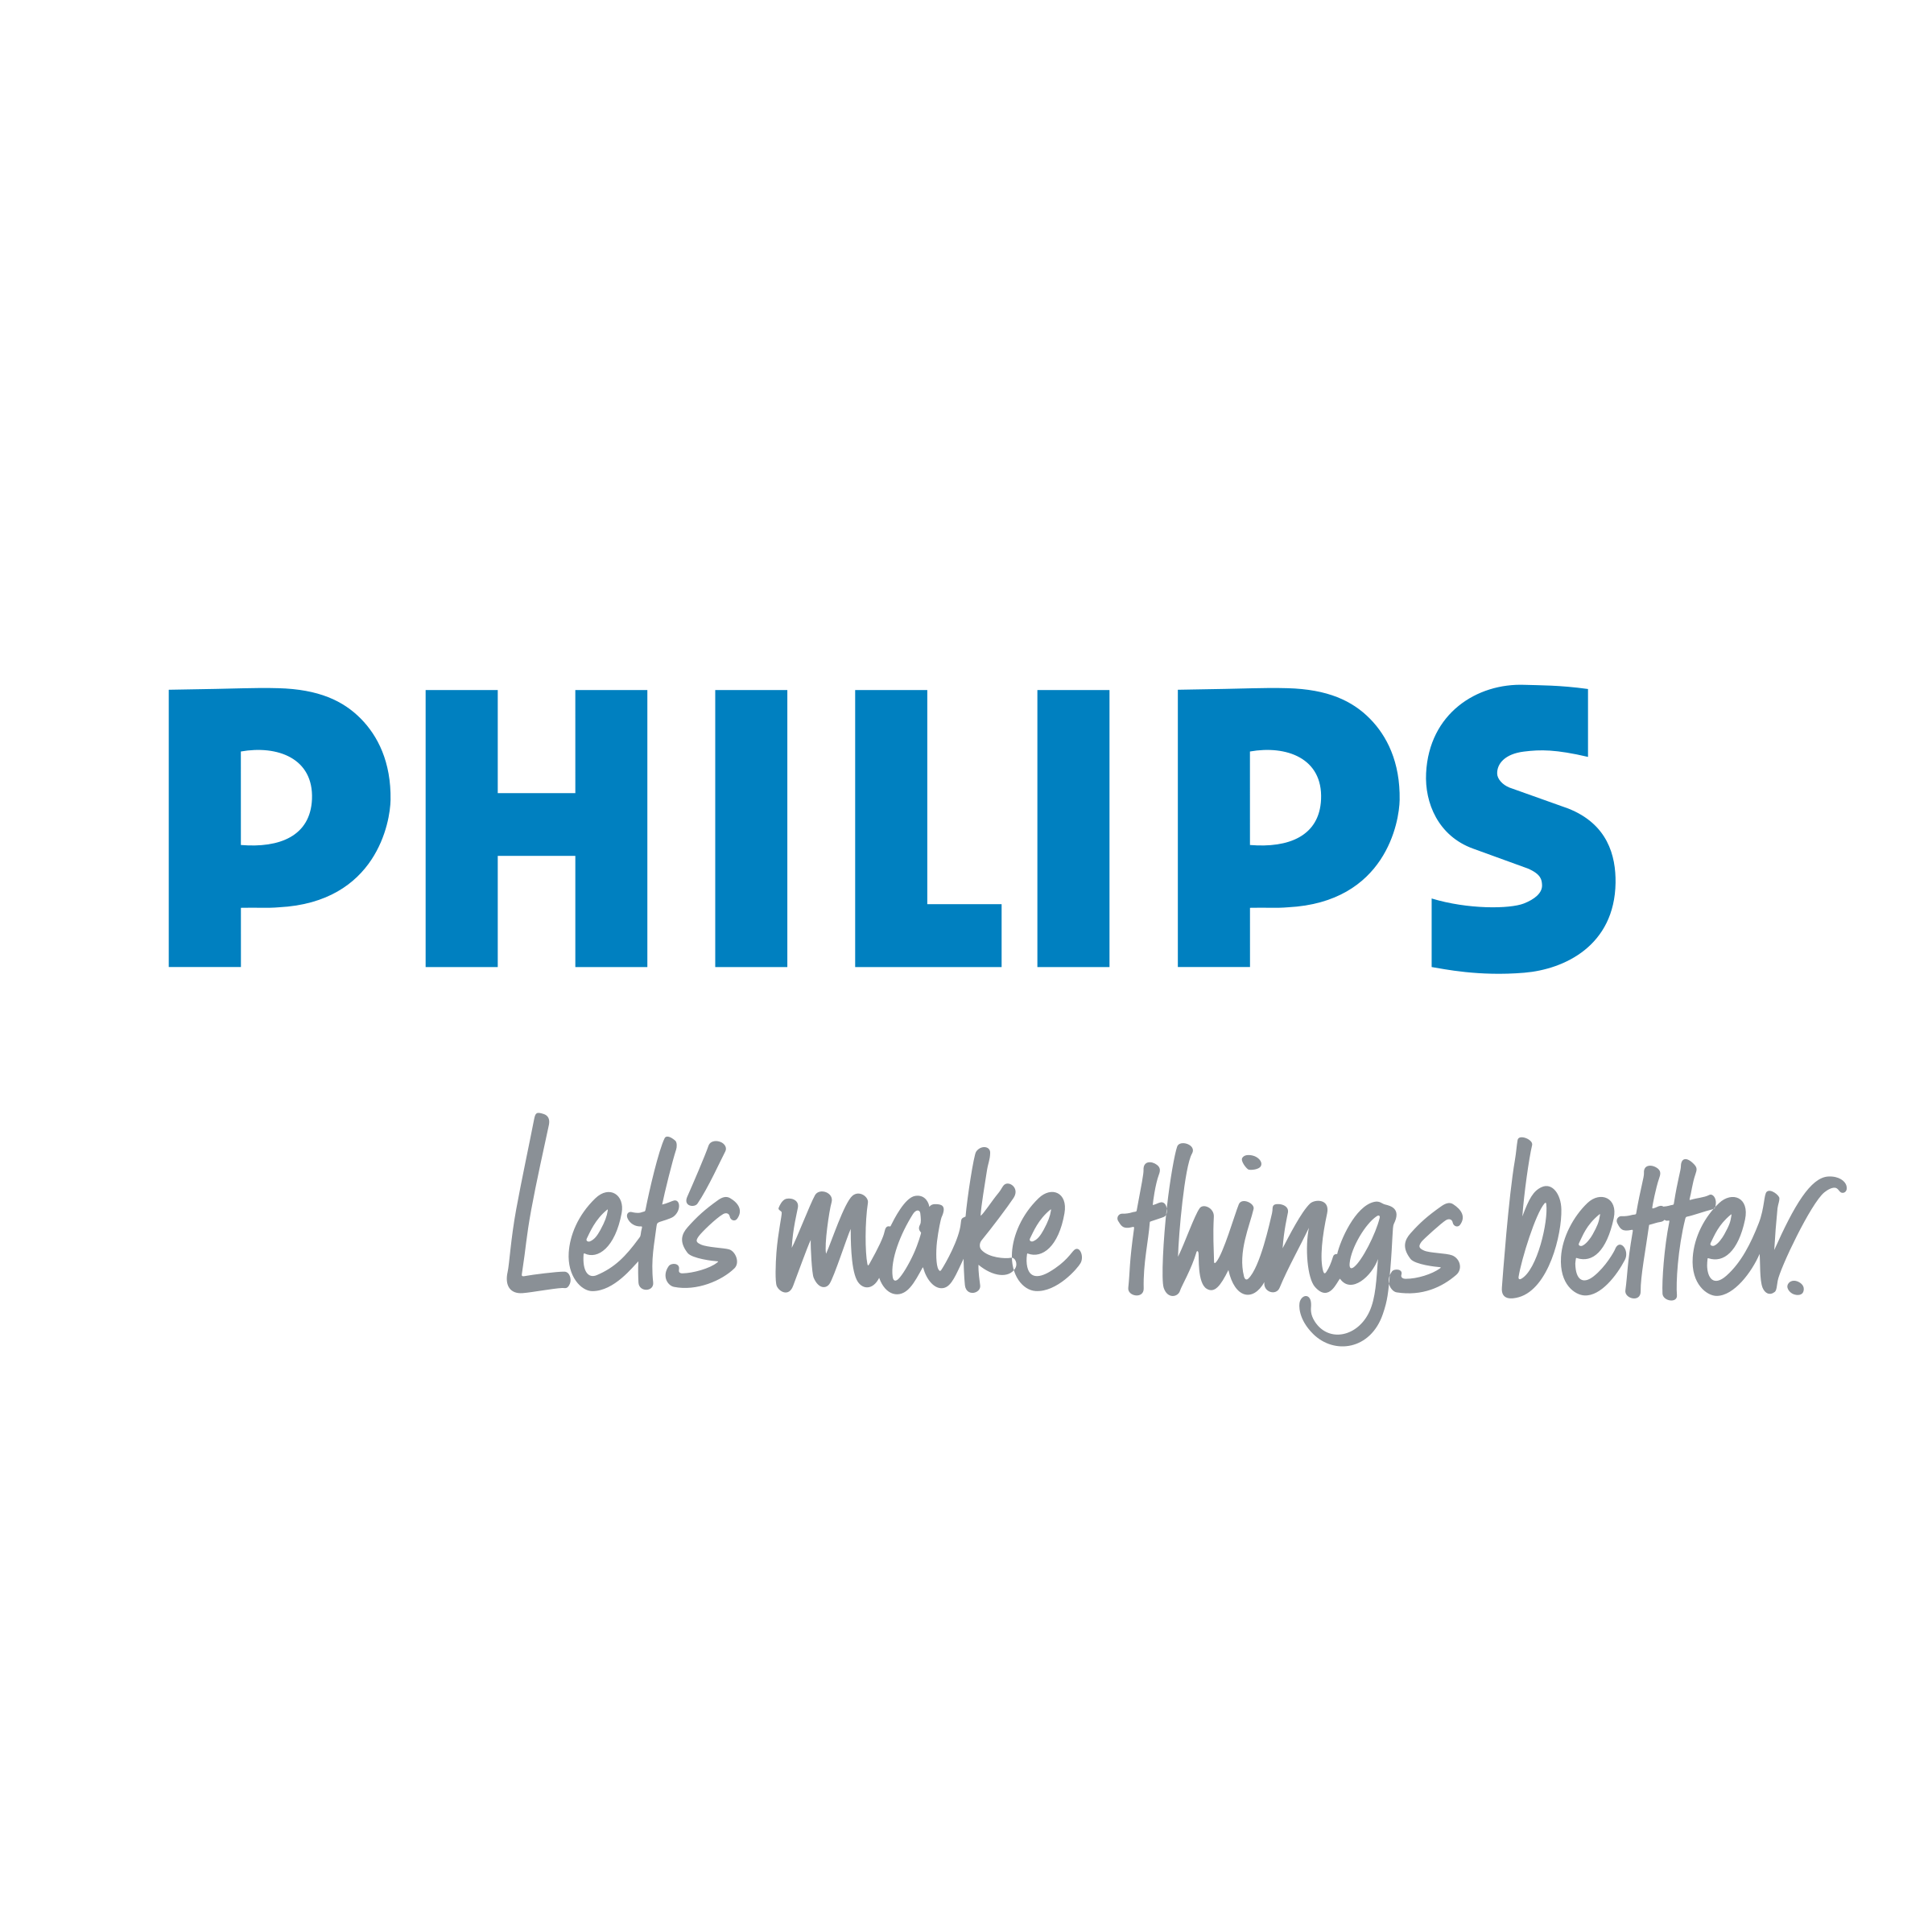 Philips Logo PNG - 180749